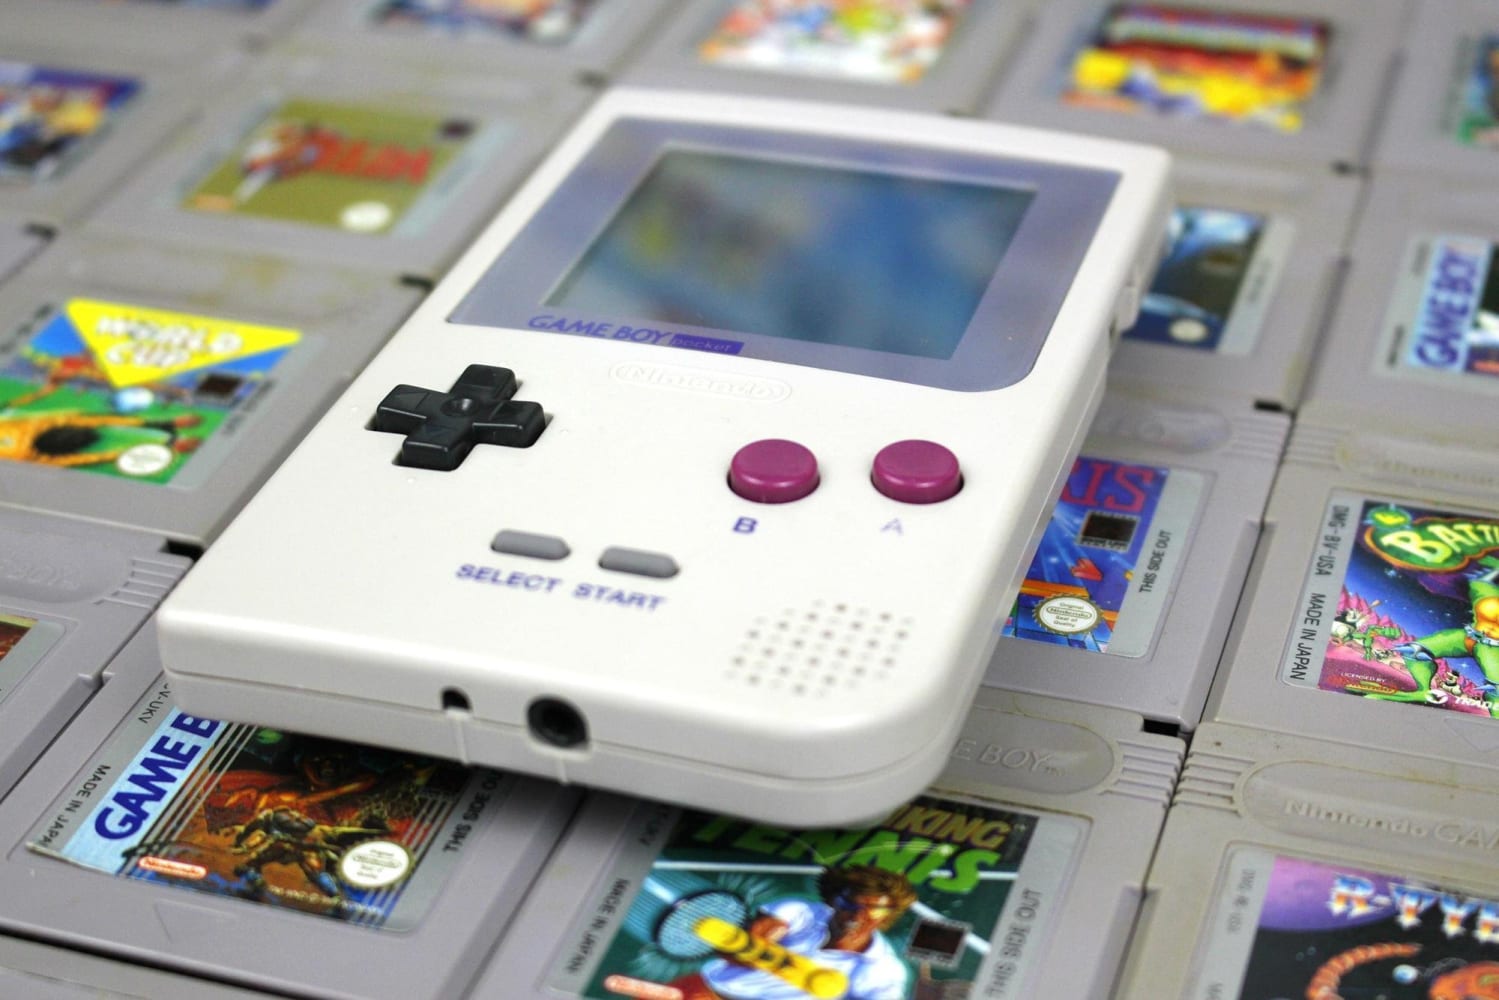 Top Gameboy games: 10 classics you need to play